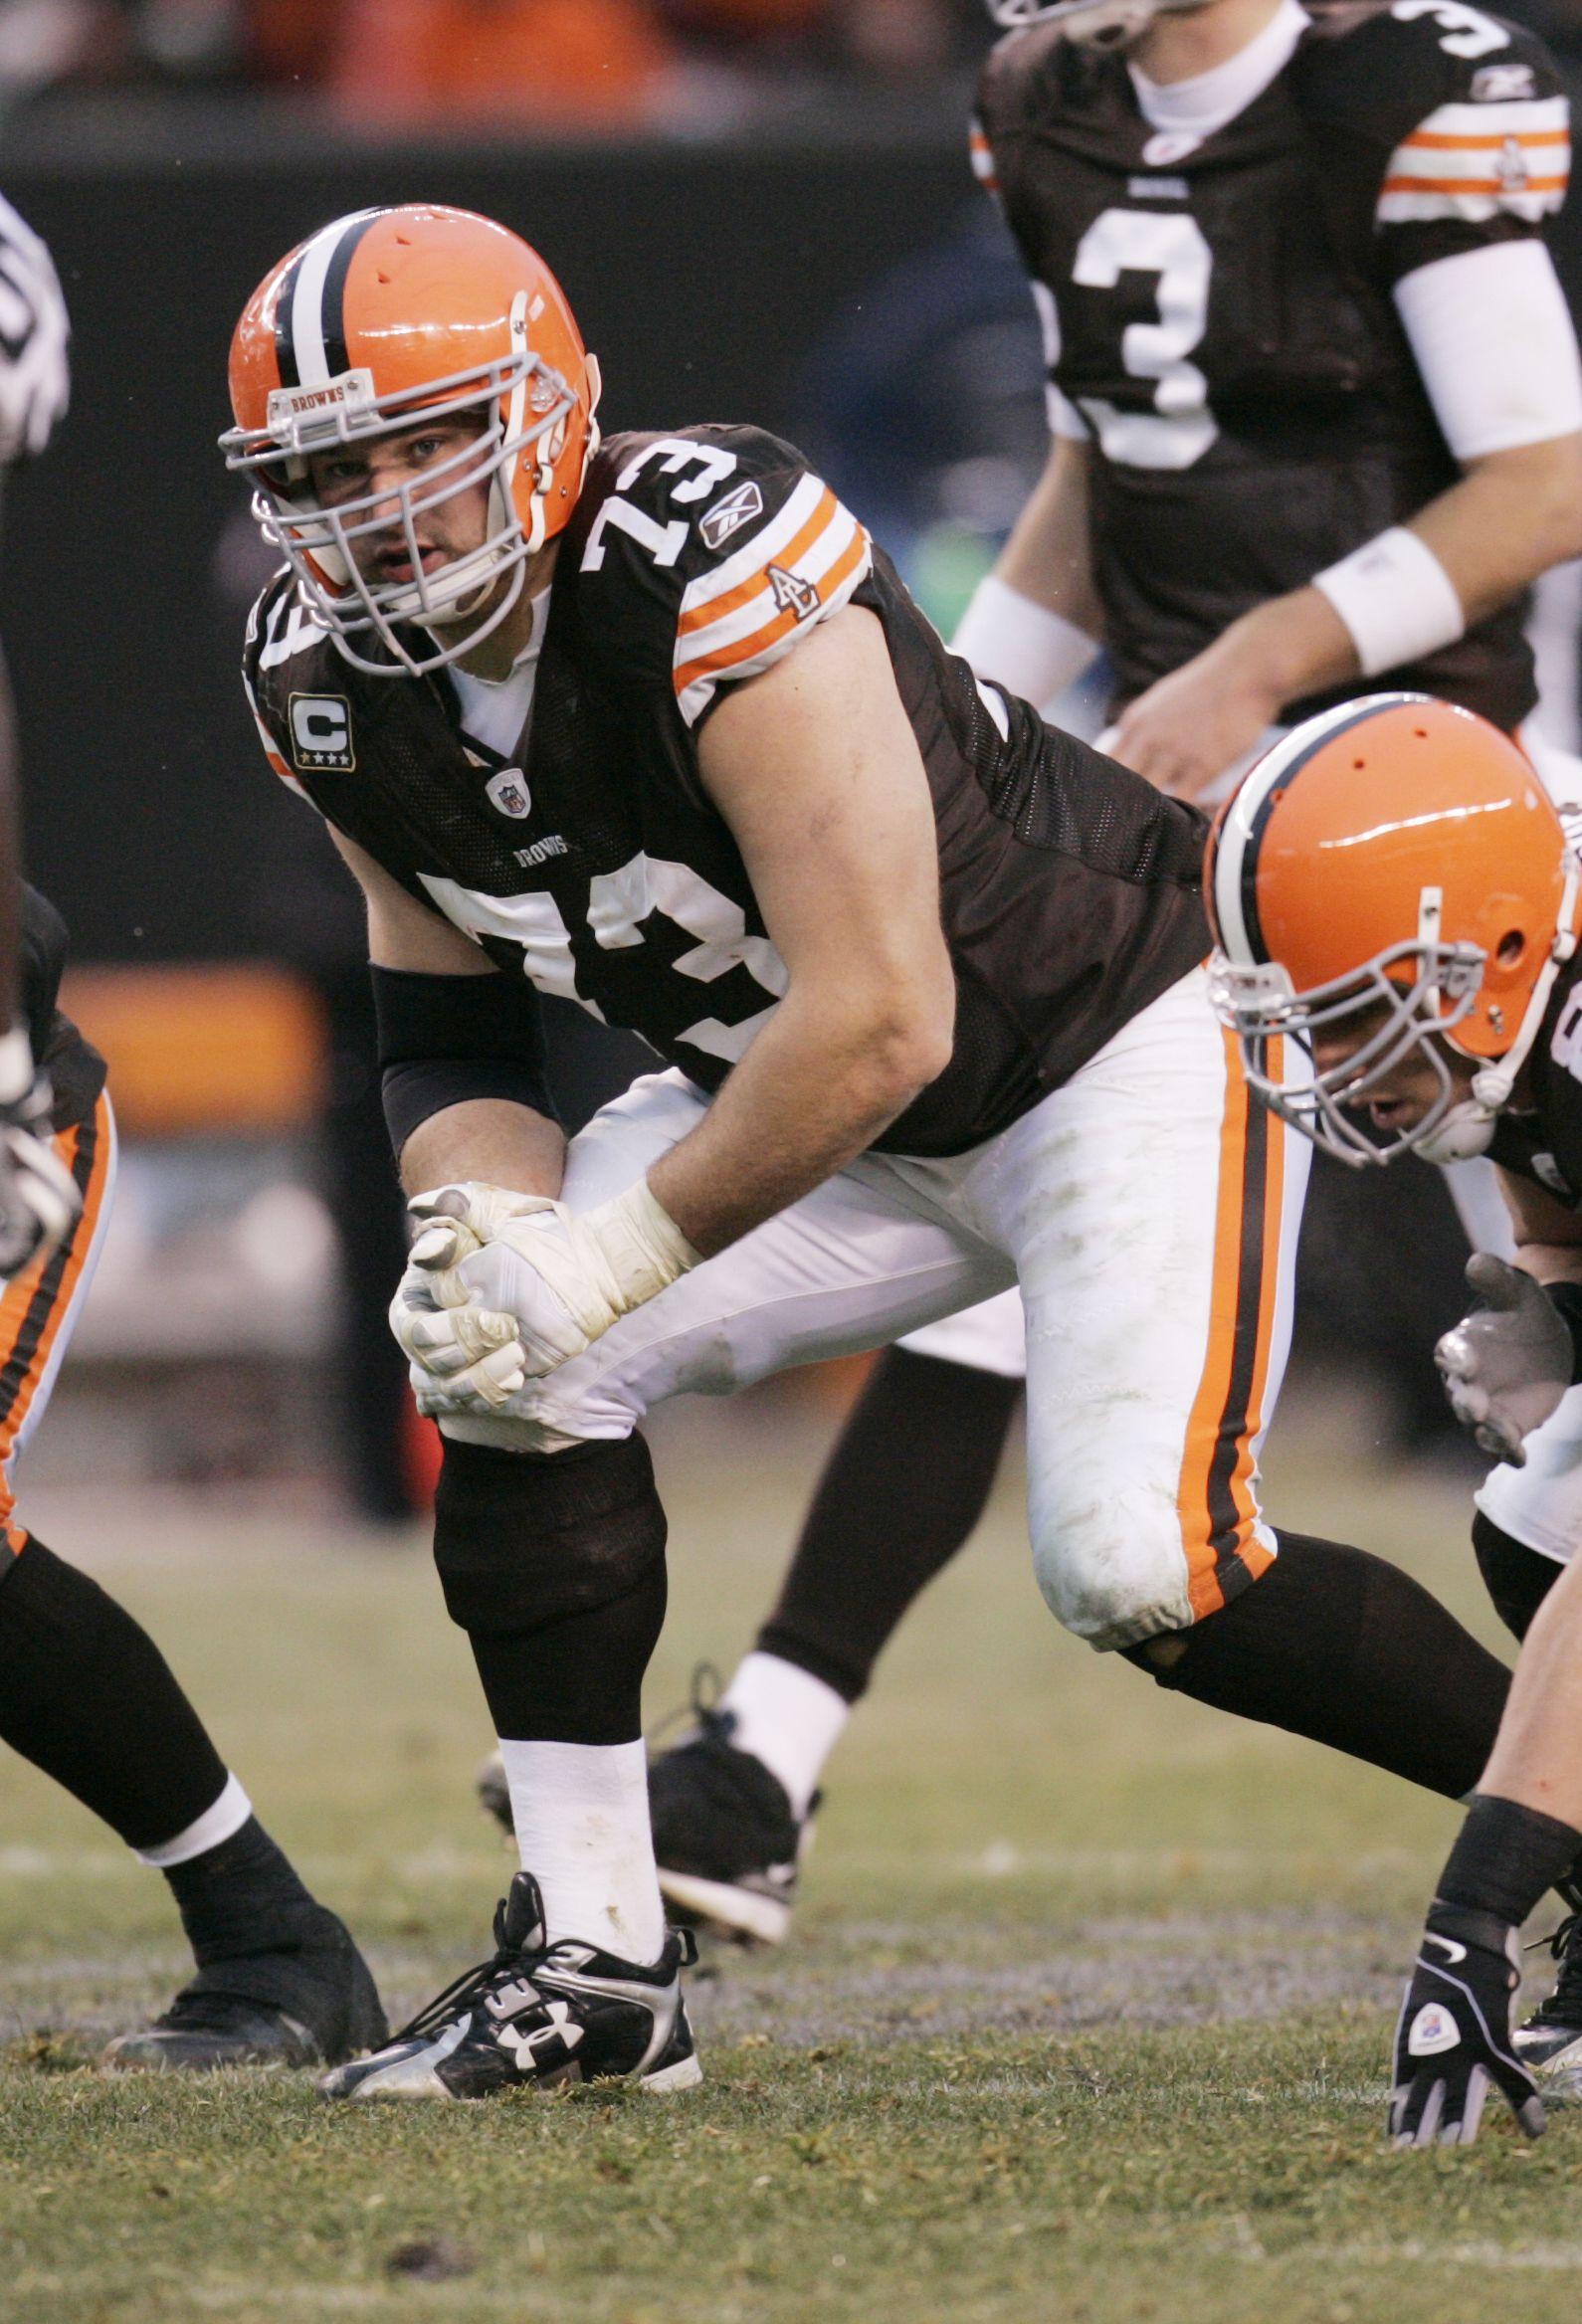 Joe Thomas of the Cleveland Browns. NFL. Cleveland